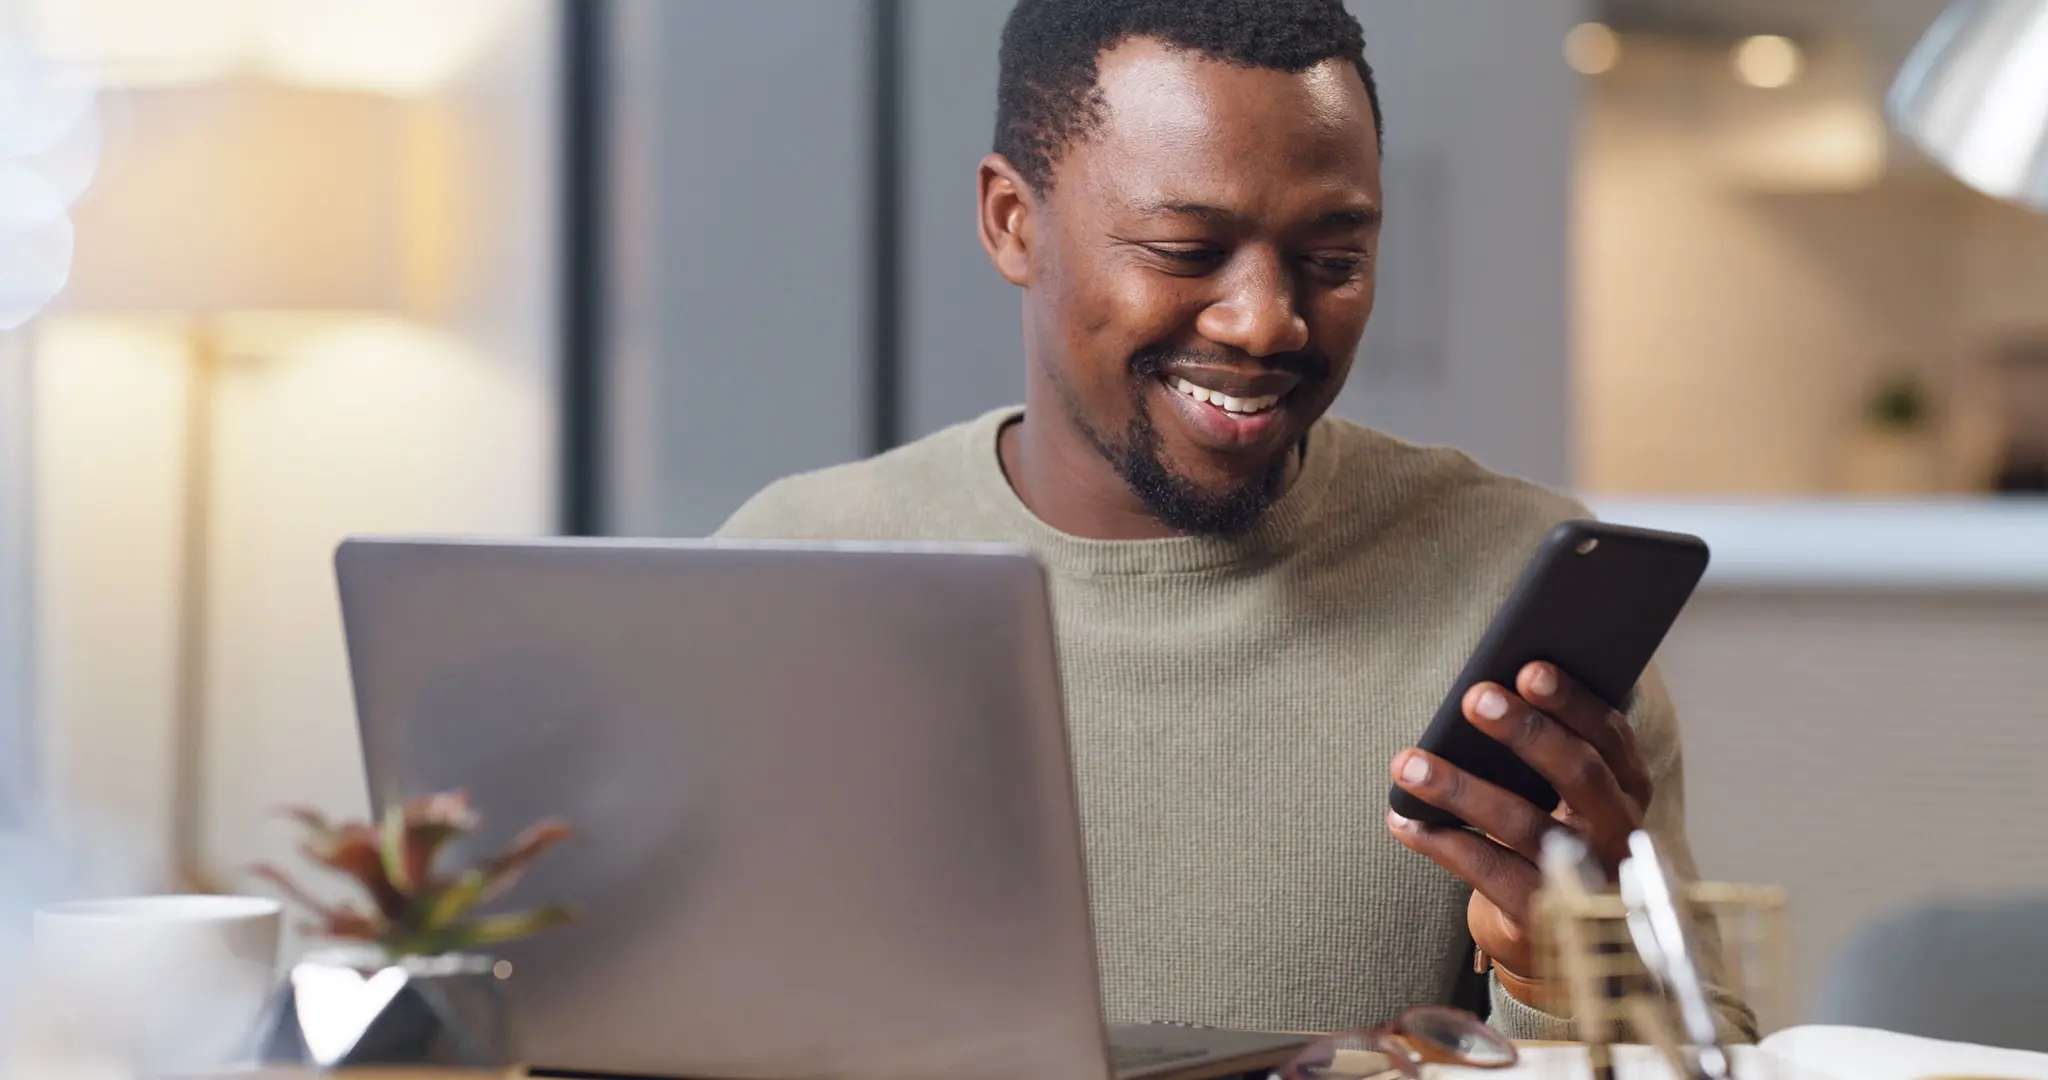 A black man is smiling while using a laptop.